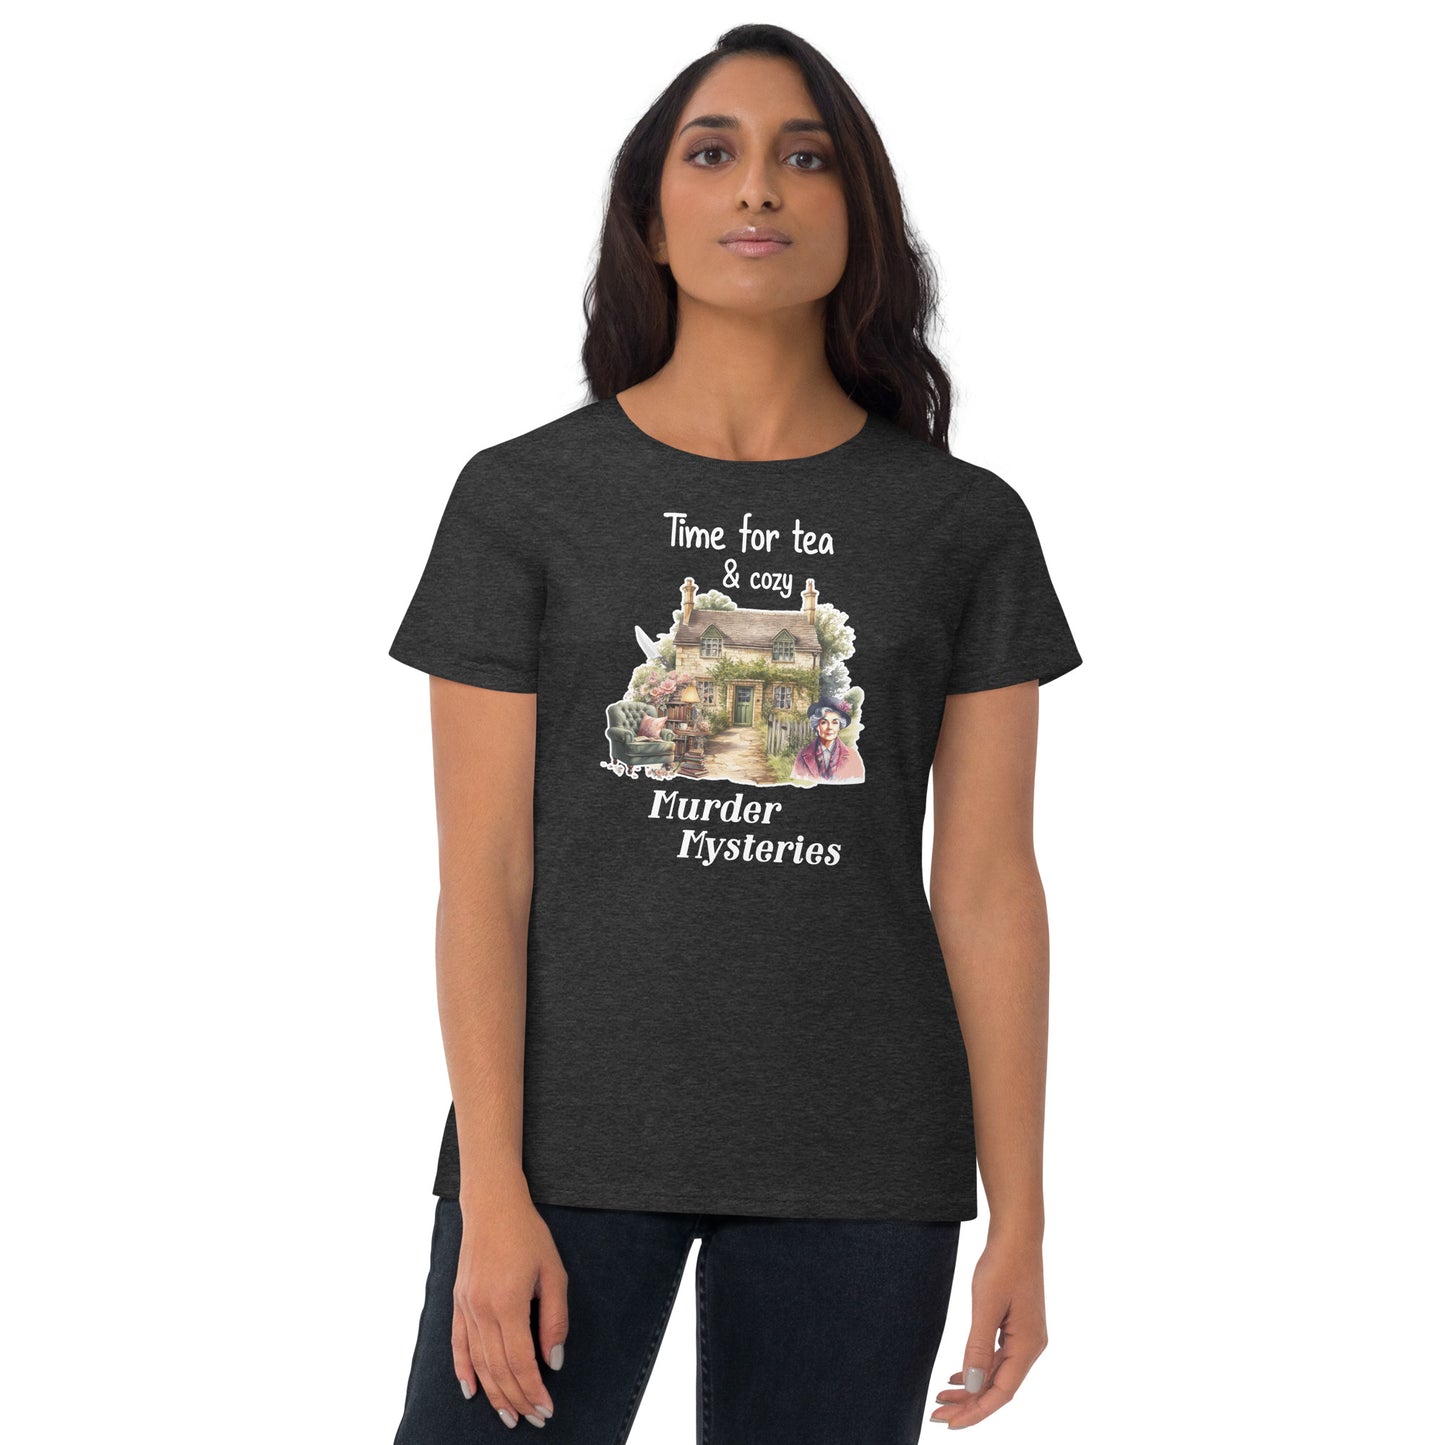 Tea and Murder Mysteries Cozy St. Mary Mead Cottage T-Shirt